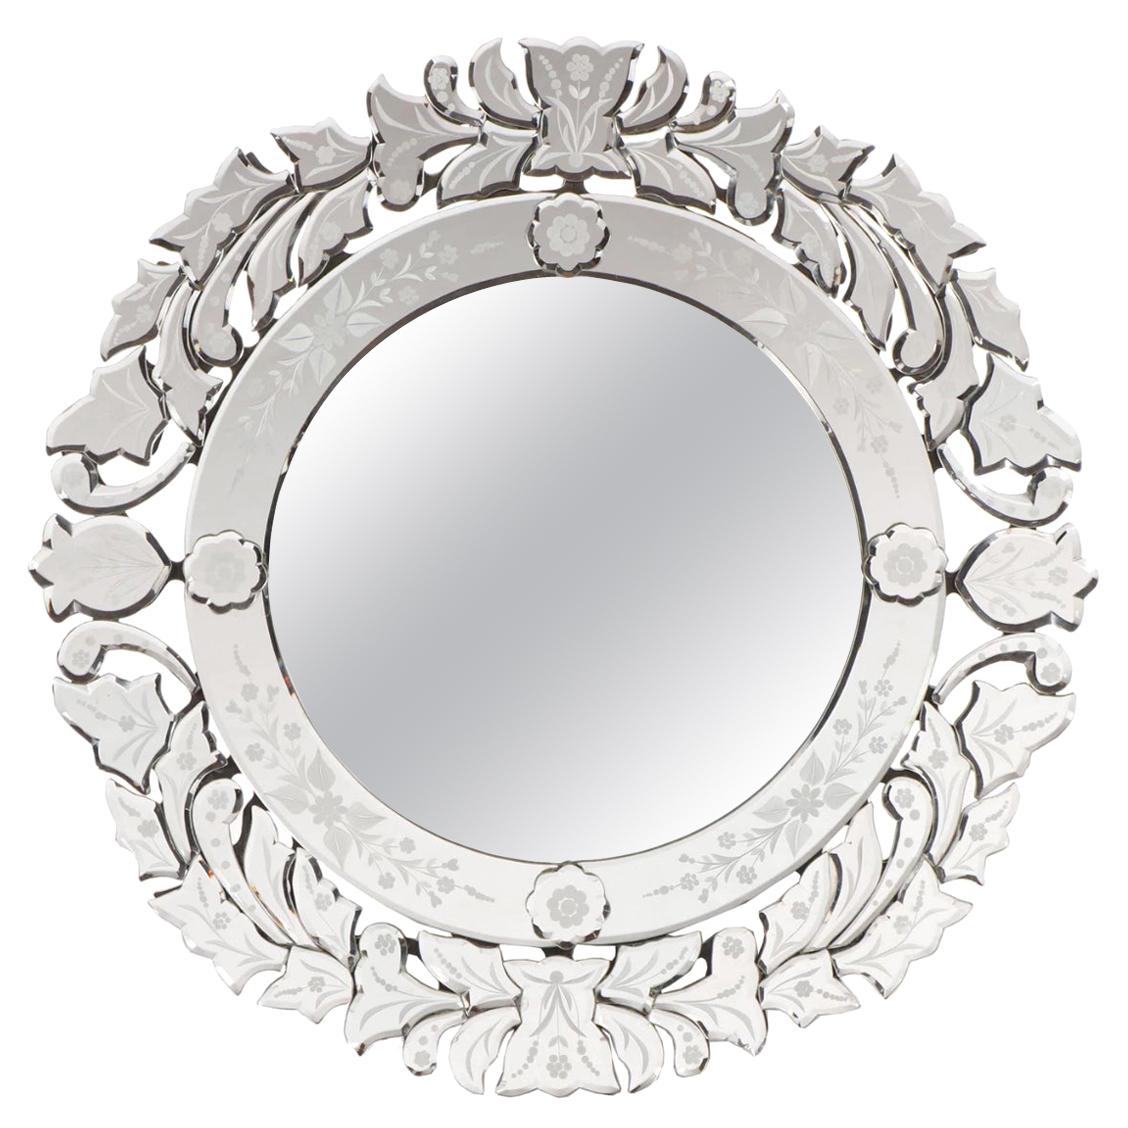 Lovely Floral Venetian Style Round Mirror For Sale